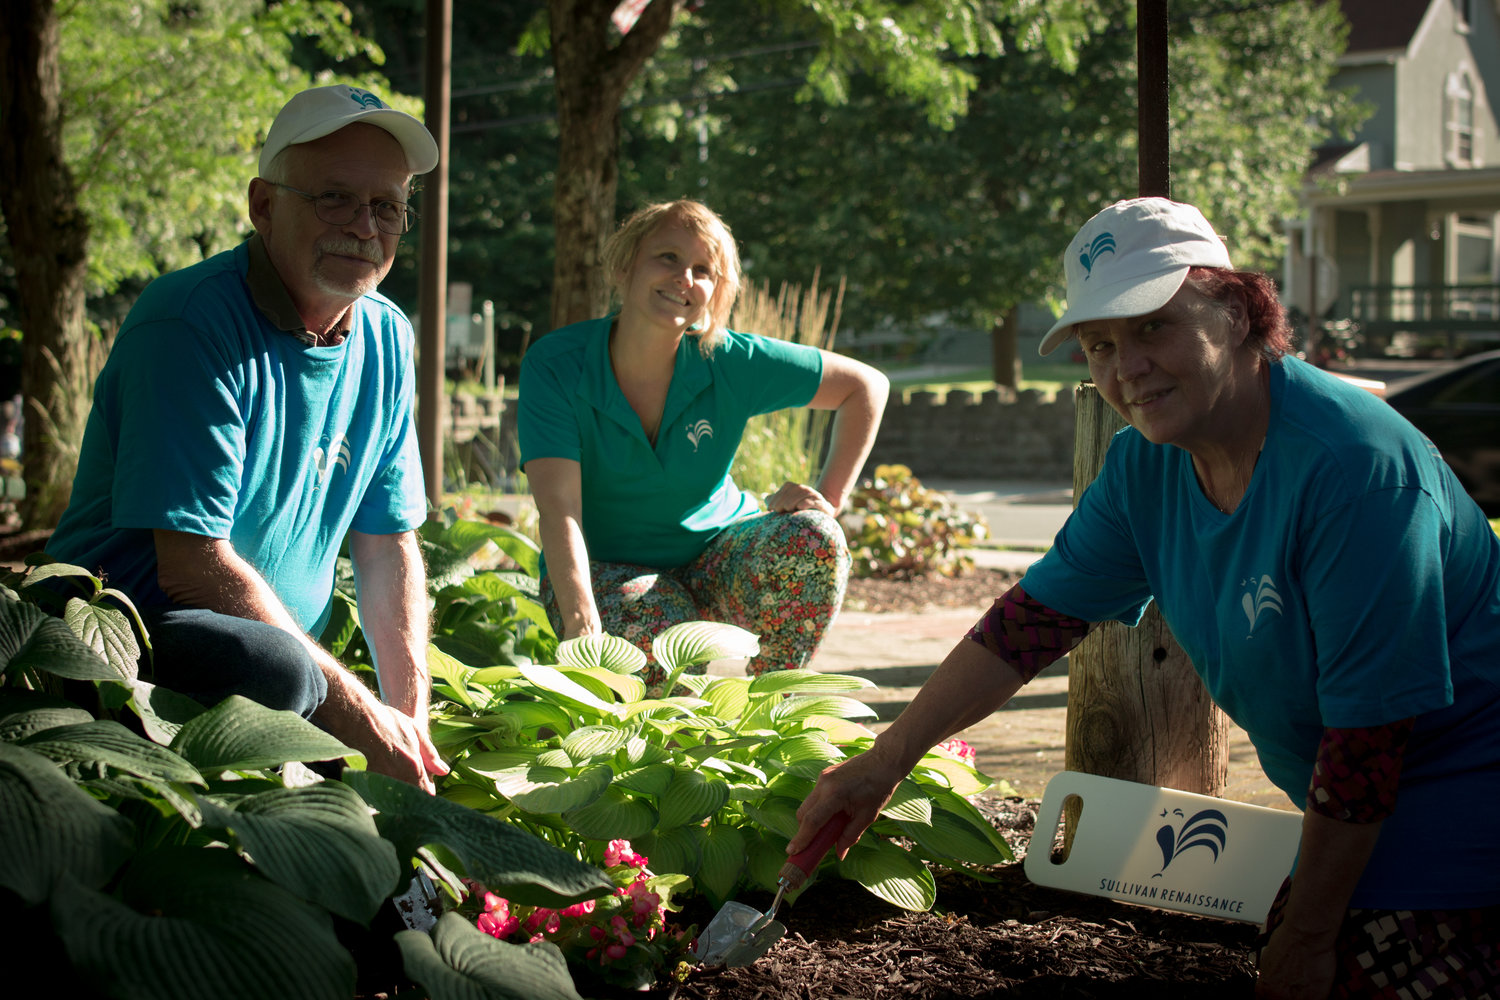 Volunteer Corps Members Frank Ulbrichm, left, Maggie Tuttle Schutte and Yolanda Suida at Lapolt Park in Liberty.